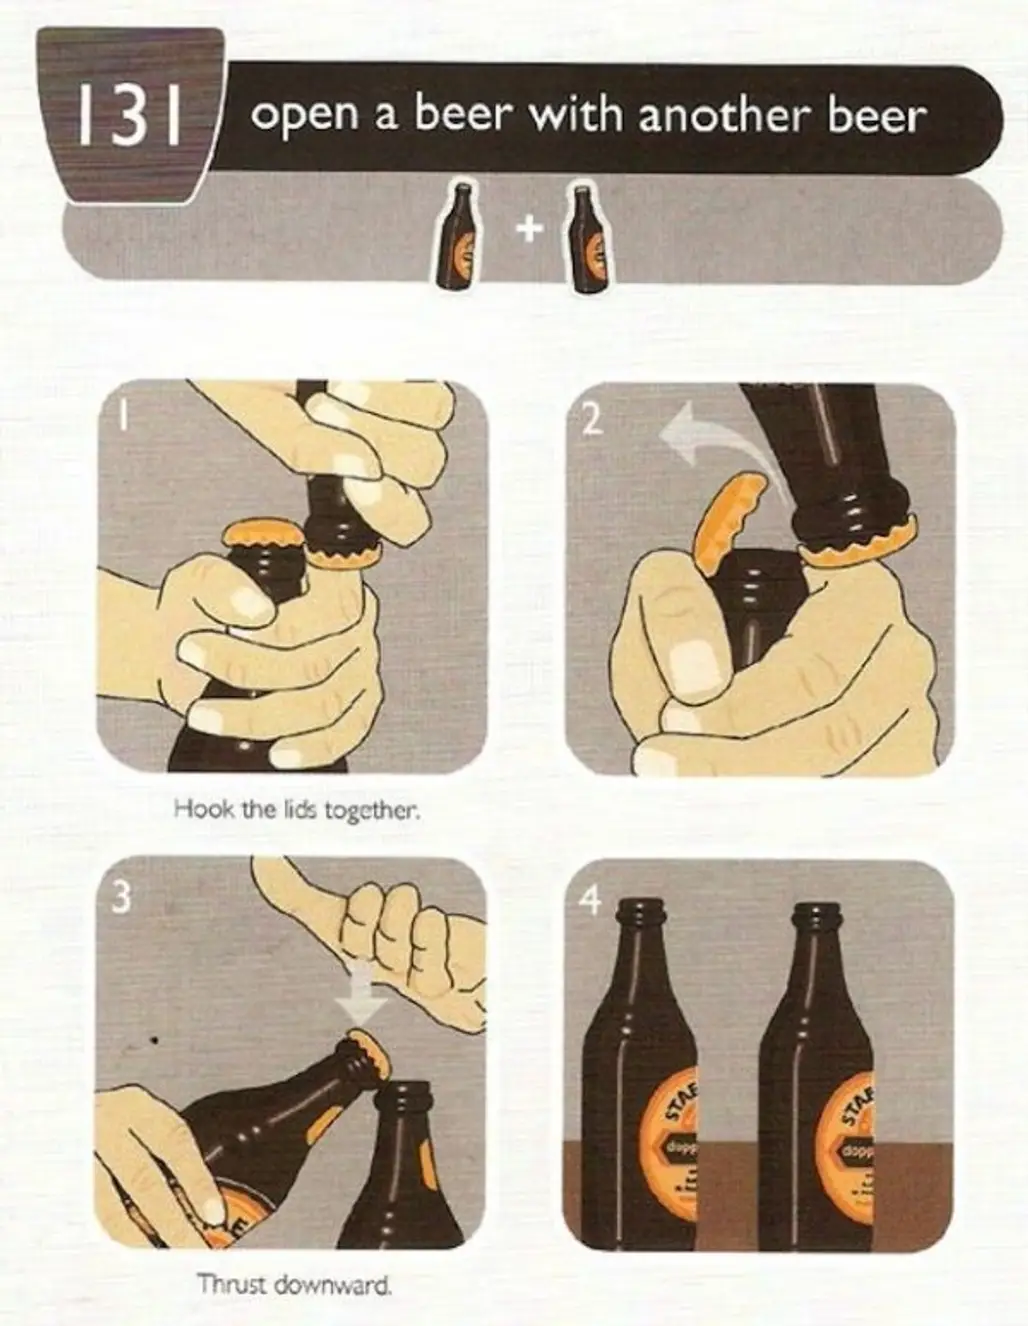 Open a Beer with Another Beer!